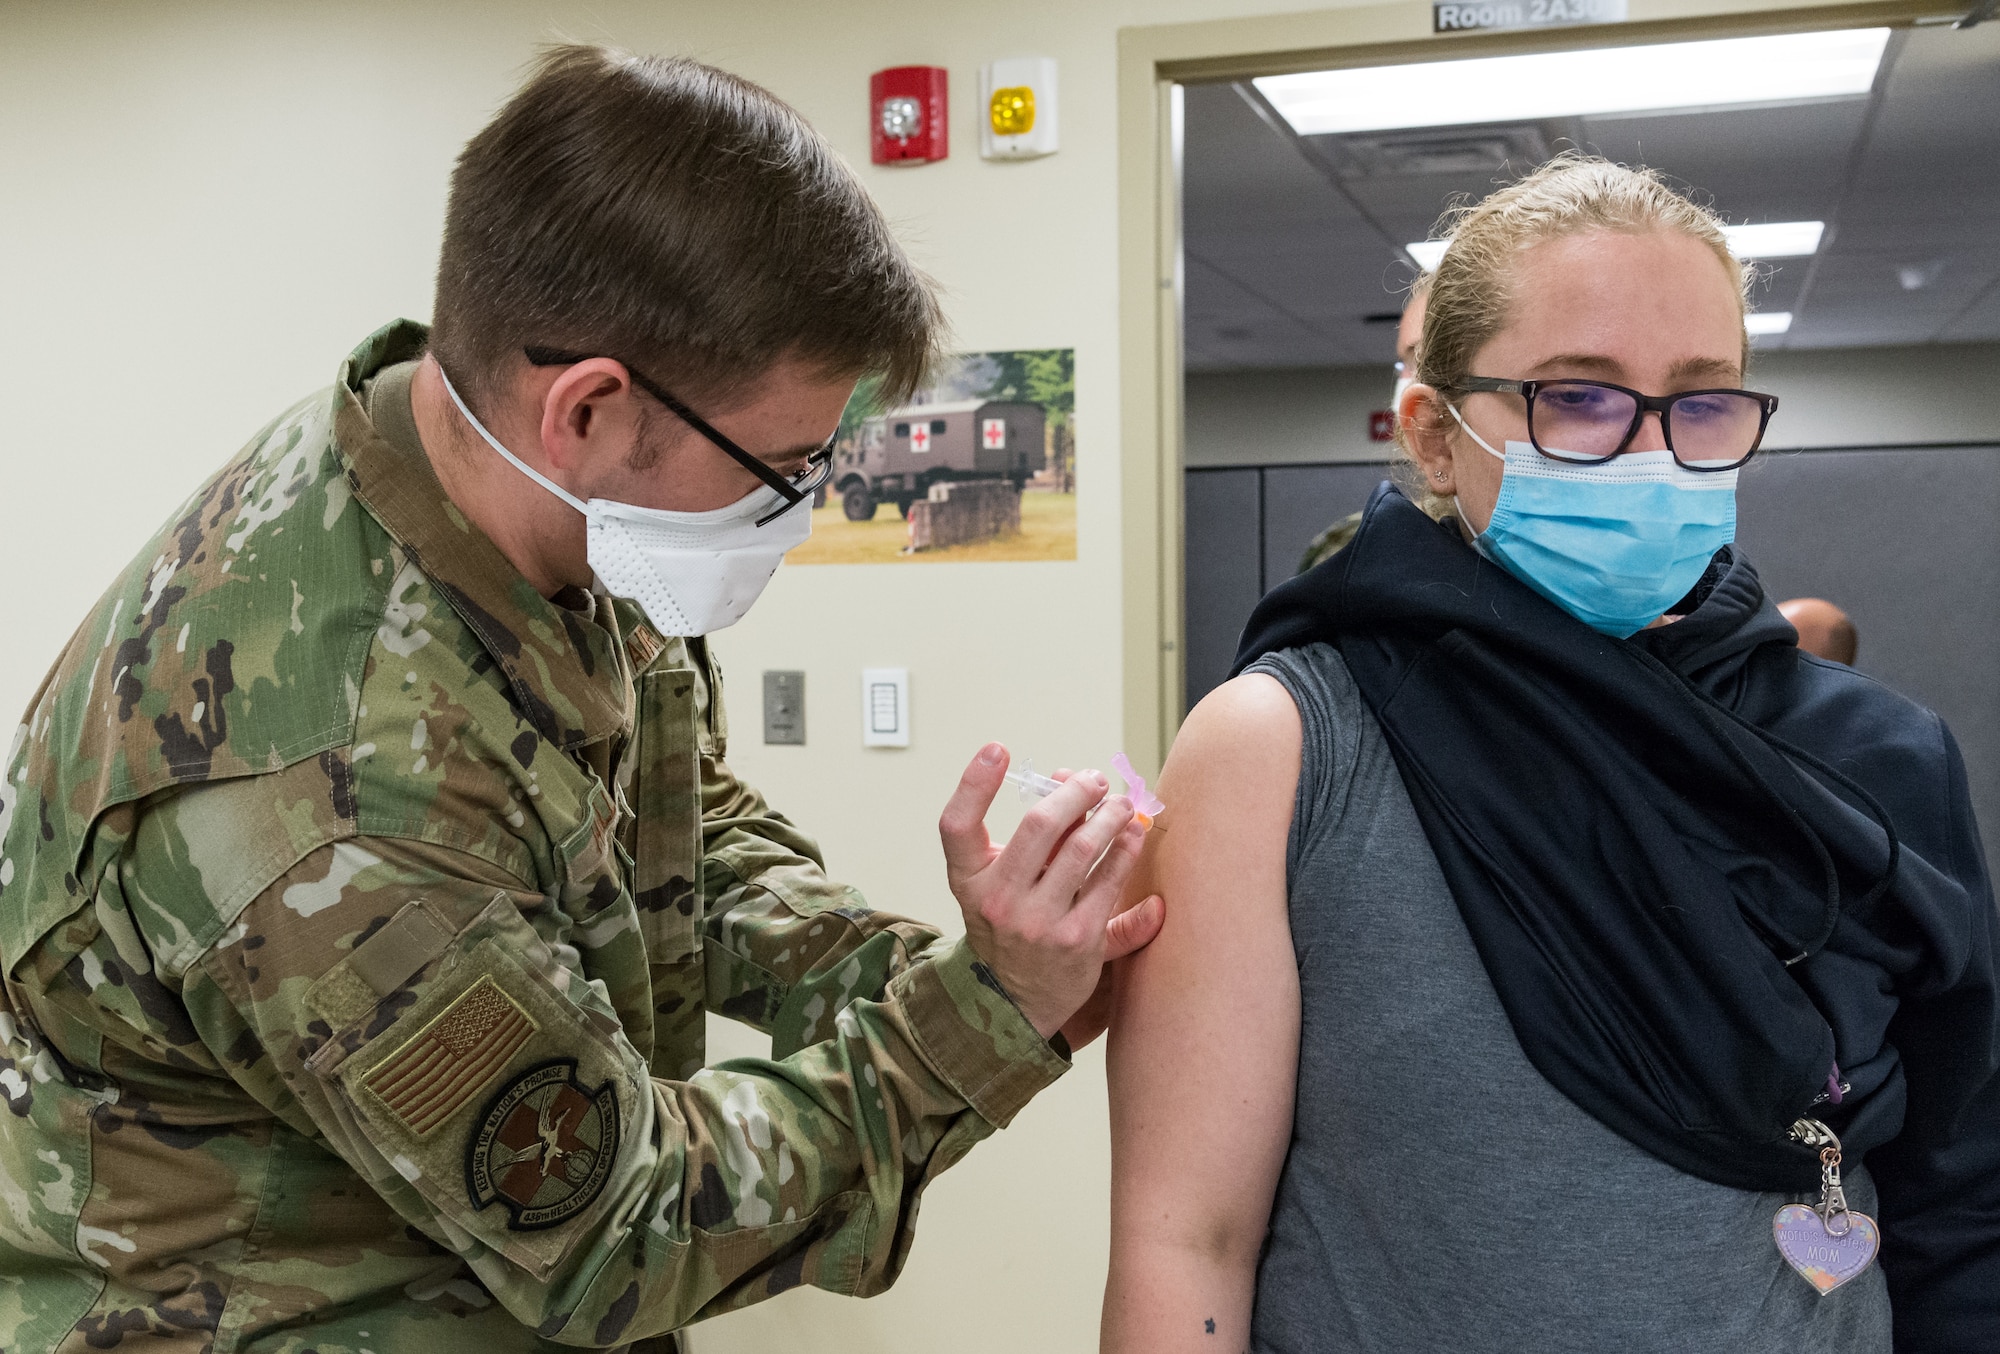 Sarah Carter, Defense Commissary Agency worker, receives the COVID-19 vaccine administered by Staff Sgt. Logan Hallman, 436th Healthcare Operations Squadron education and training noncommissioned officer in charge, Jan. 22, 2021, at Dover Air Force Base, Delaware. Carter was among the first Team Dover front-line workers who voluntarily received the vaccine in accordance with Department of Defense guidance. The vaccine was granted emergency use authorization by the U.S. Food and Drug Administration for use in prevention of COVID-19. (U.S. Air Force photo by Roland Balik)